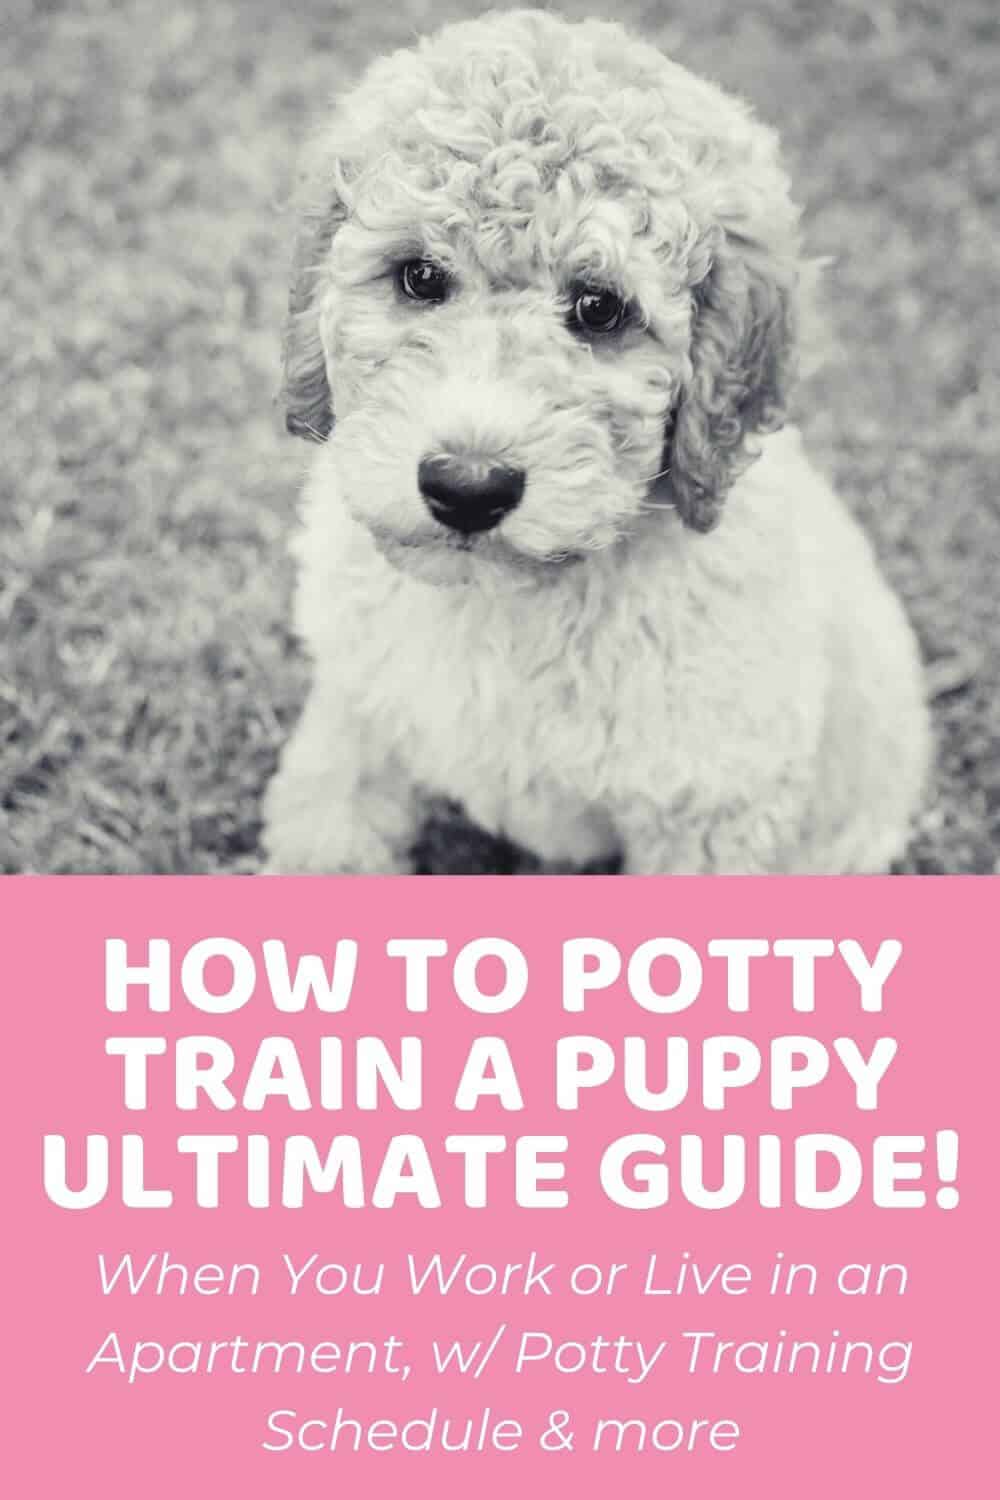 How to Potty Train a Puppy Ultimate Guide With Puppy Potty Training Schedule